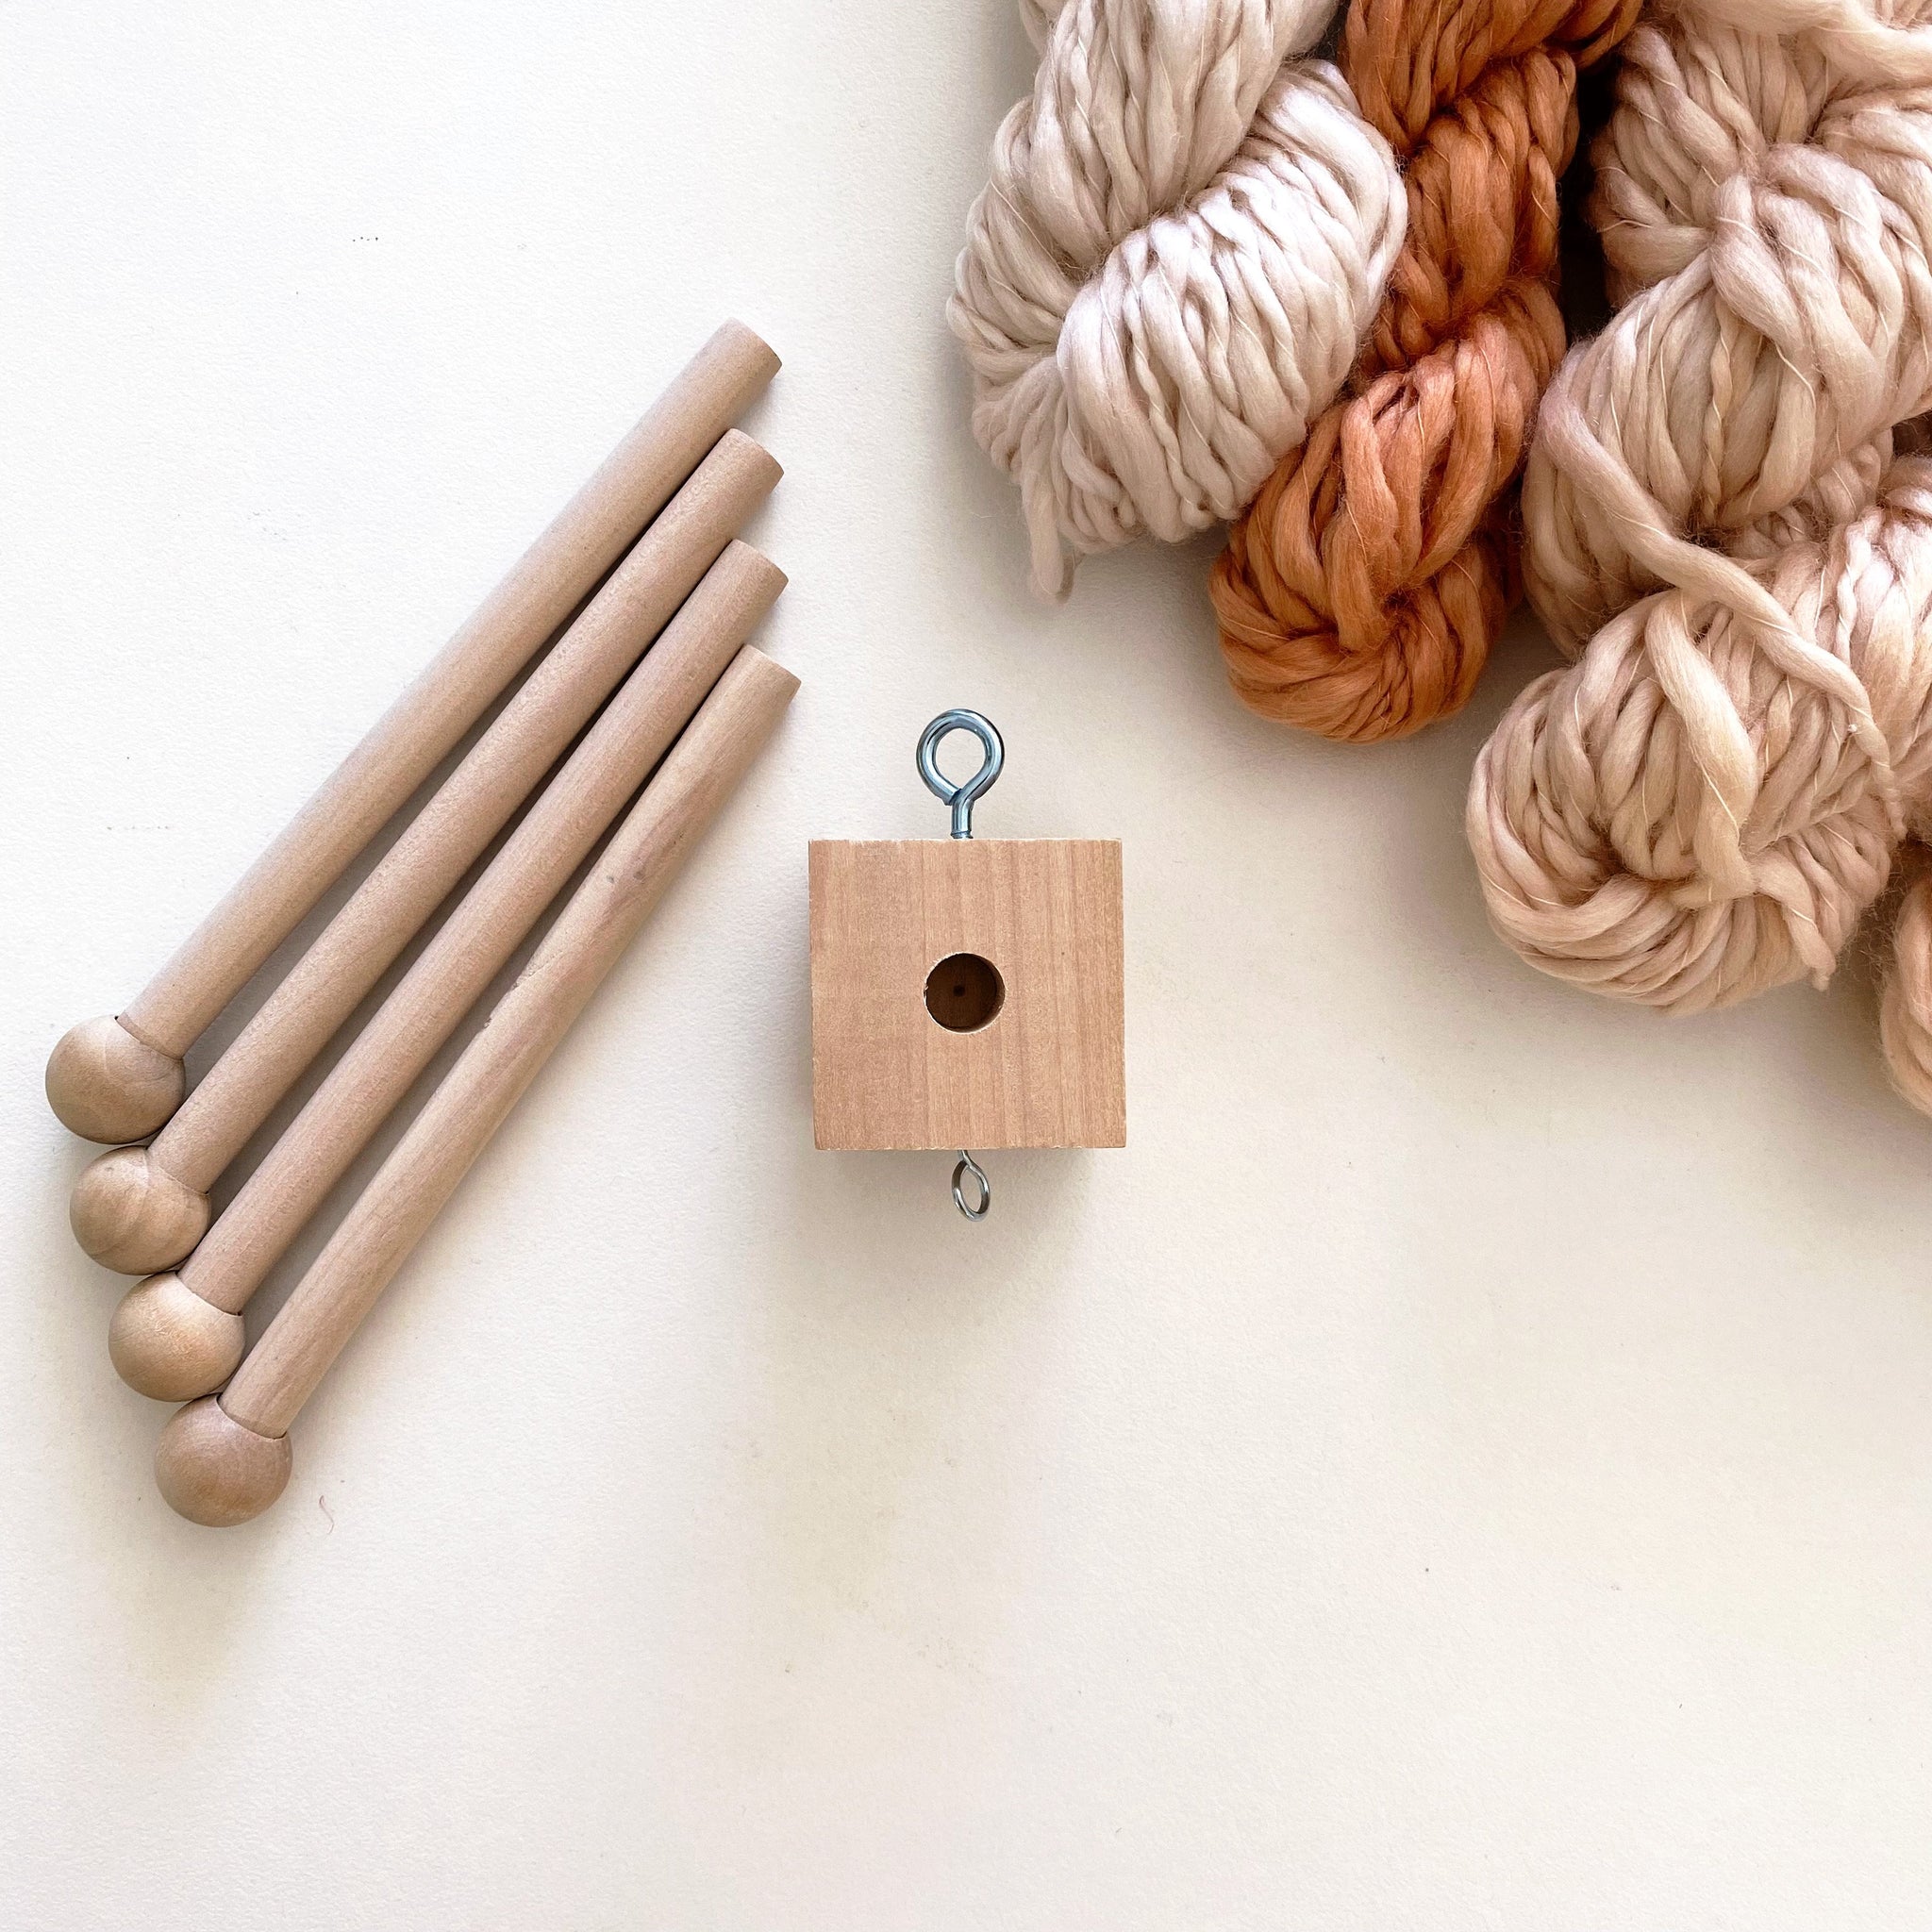 Wooden Rings - Mary Maker Studio - Macrame & Weaving Supplies and Education.